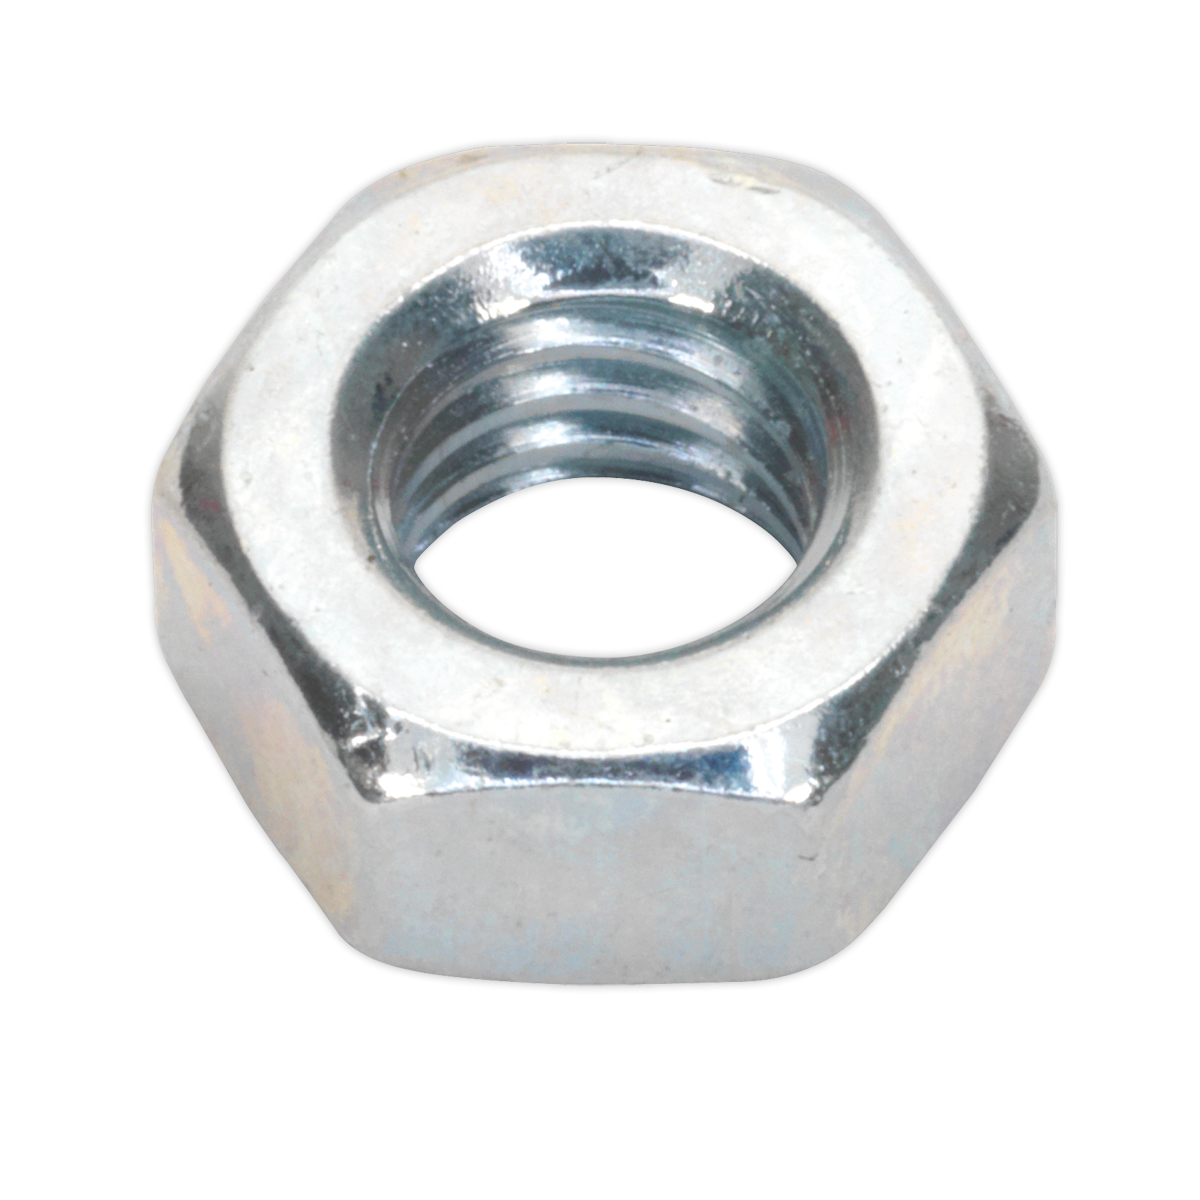 Steel Nut DIN 934 - M6 - Pack of 100 - SN6 - Farming Parts